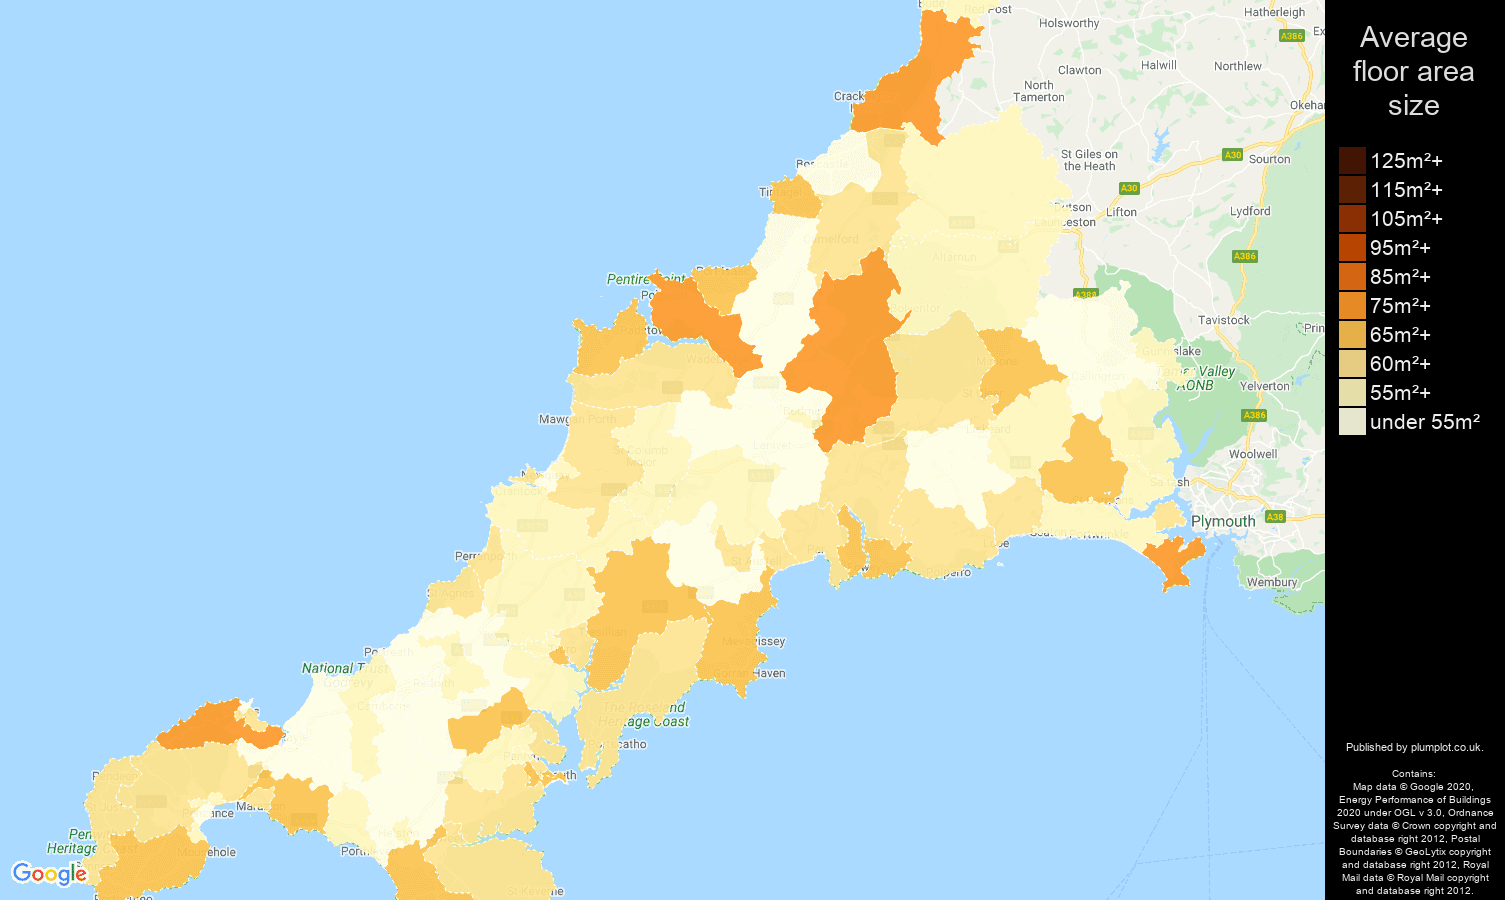 Cornwall map of average floor area size of flats